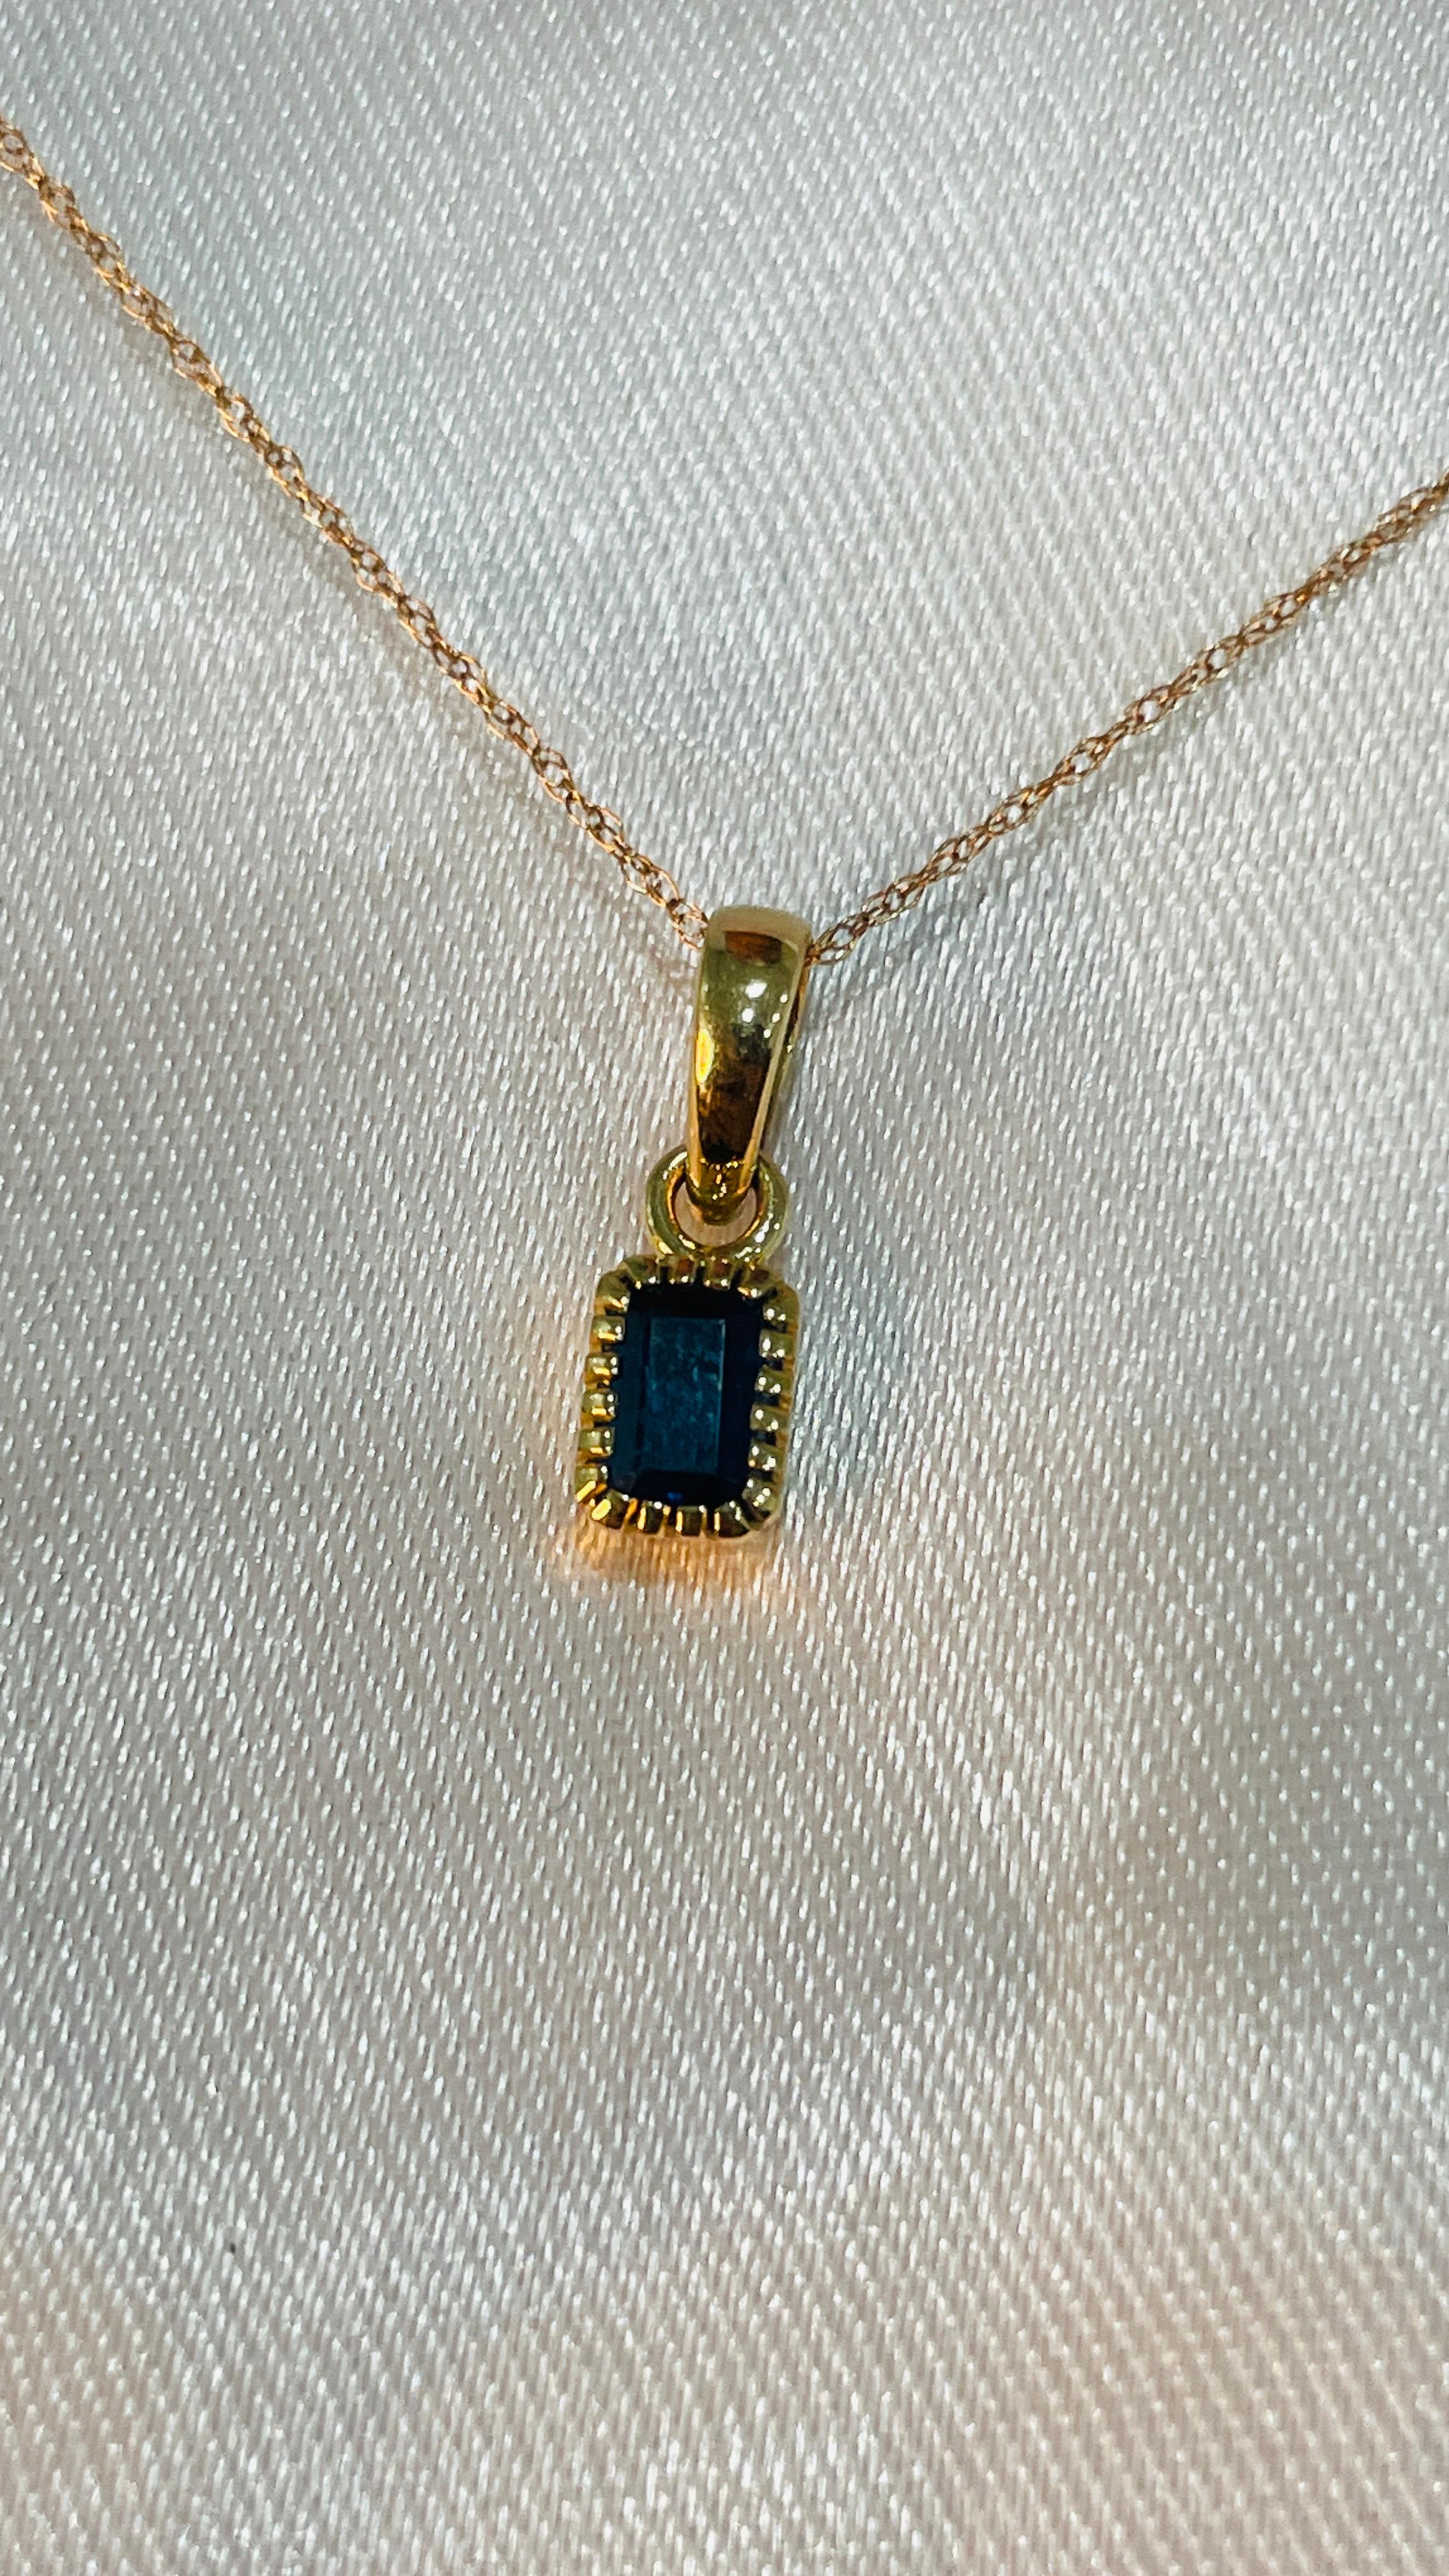 Octagon Cut 0.60 Ct Cushion Cut Blue Sapphire Pendant in 14K Yellow Gold For Sale